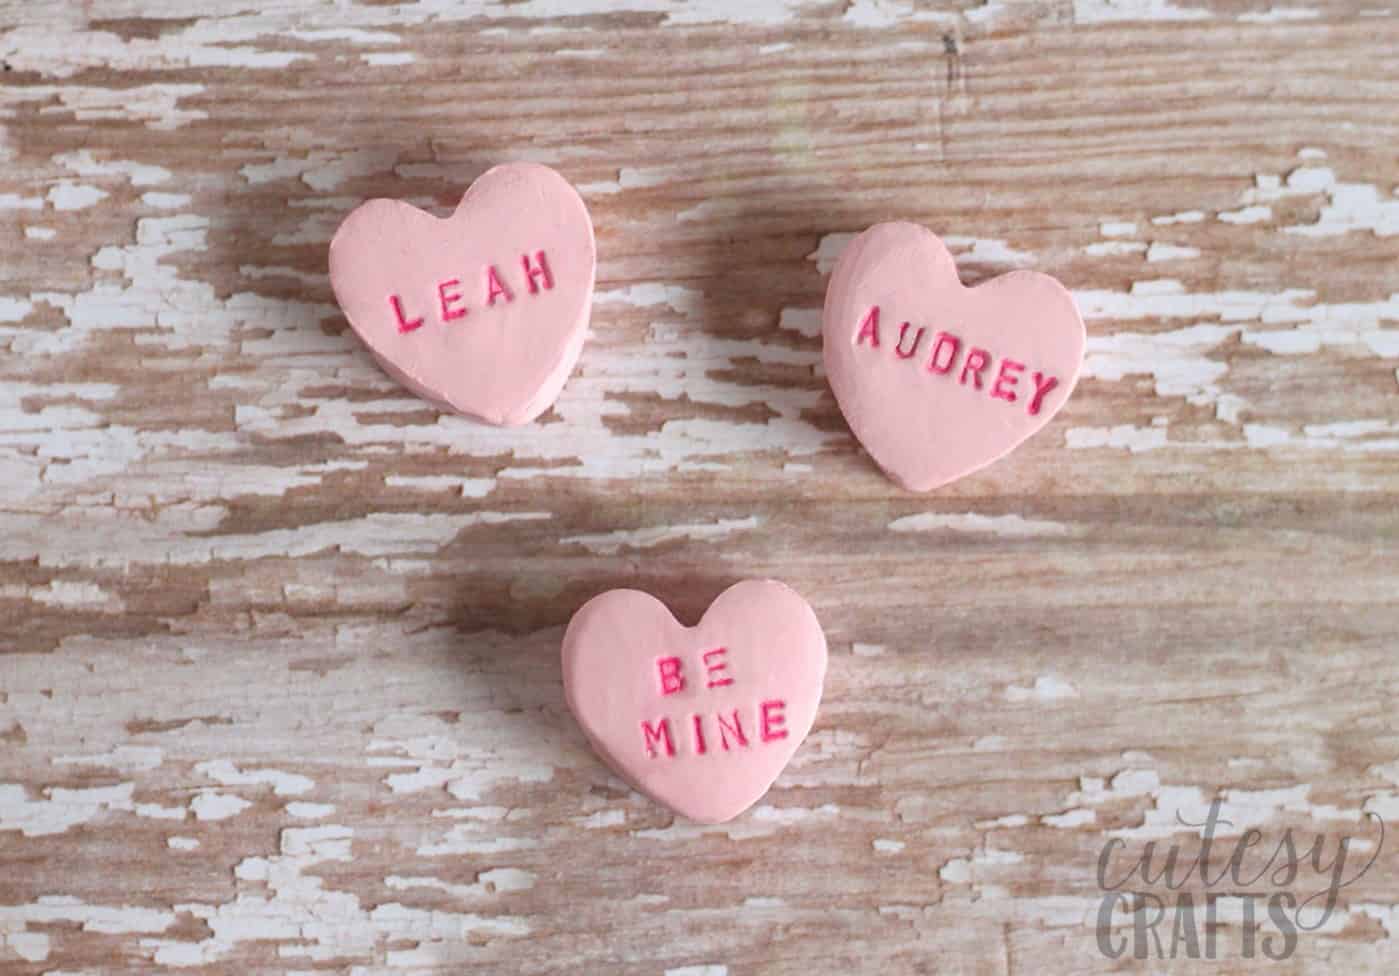 Finished clay hearts that say "Leah," "Audrey," and "Be Mine"